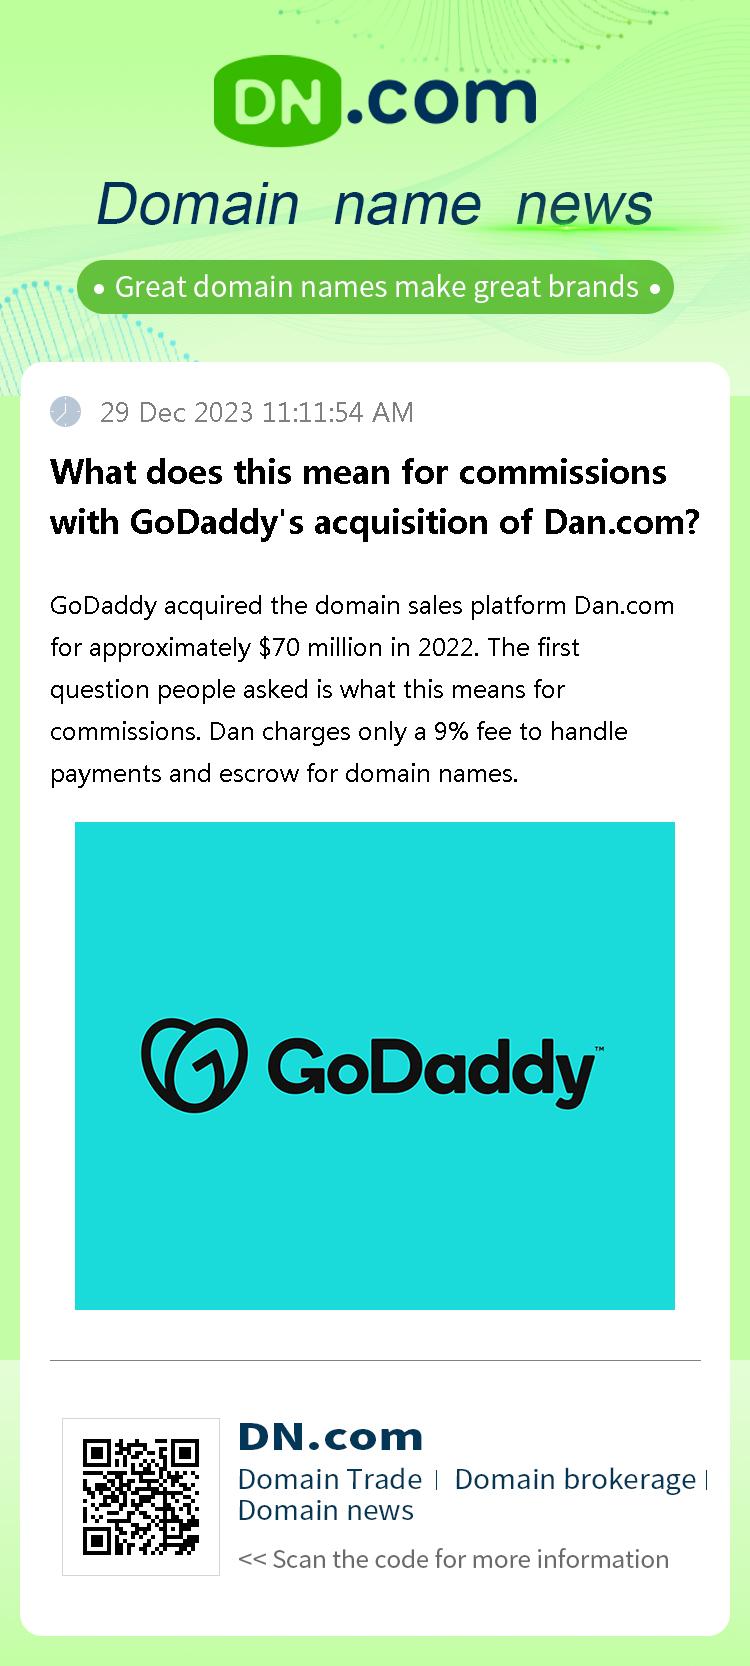 What does this mean for commissions with GoDaddy's acquisition of Dan.com?